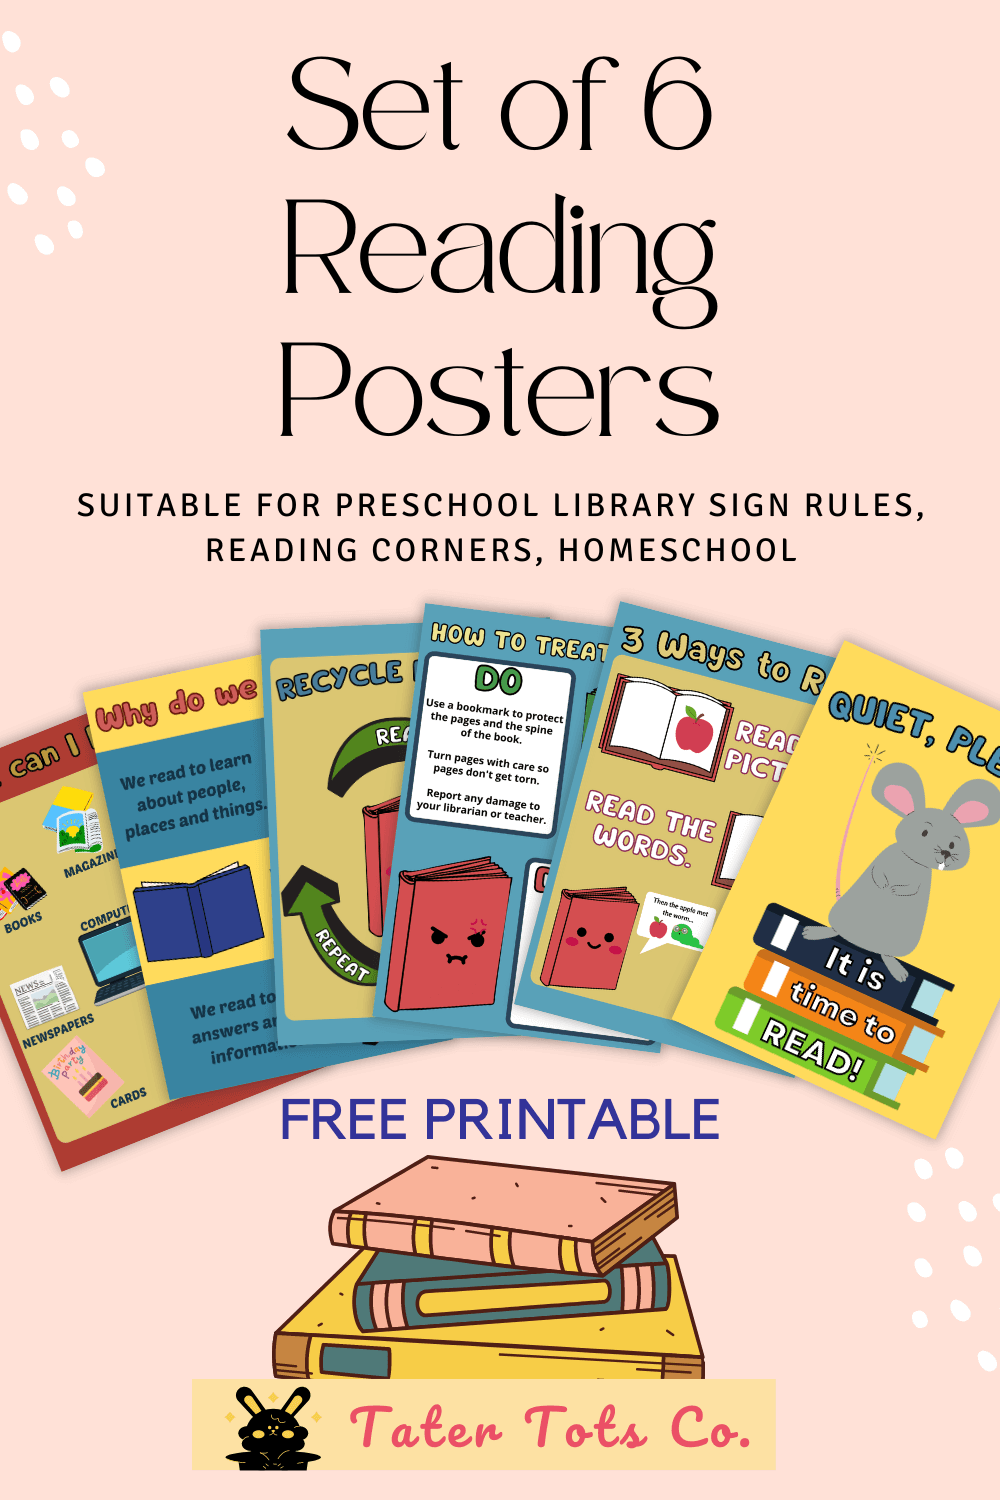 Transform Your Reading Space with a Free Printable  Set of 6 Preschool Reading Posters